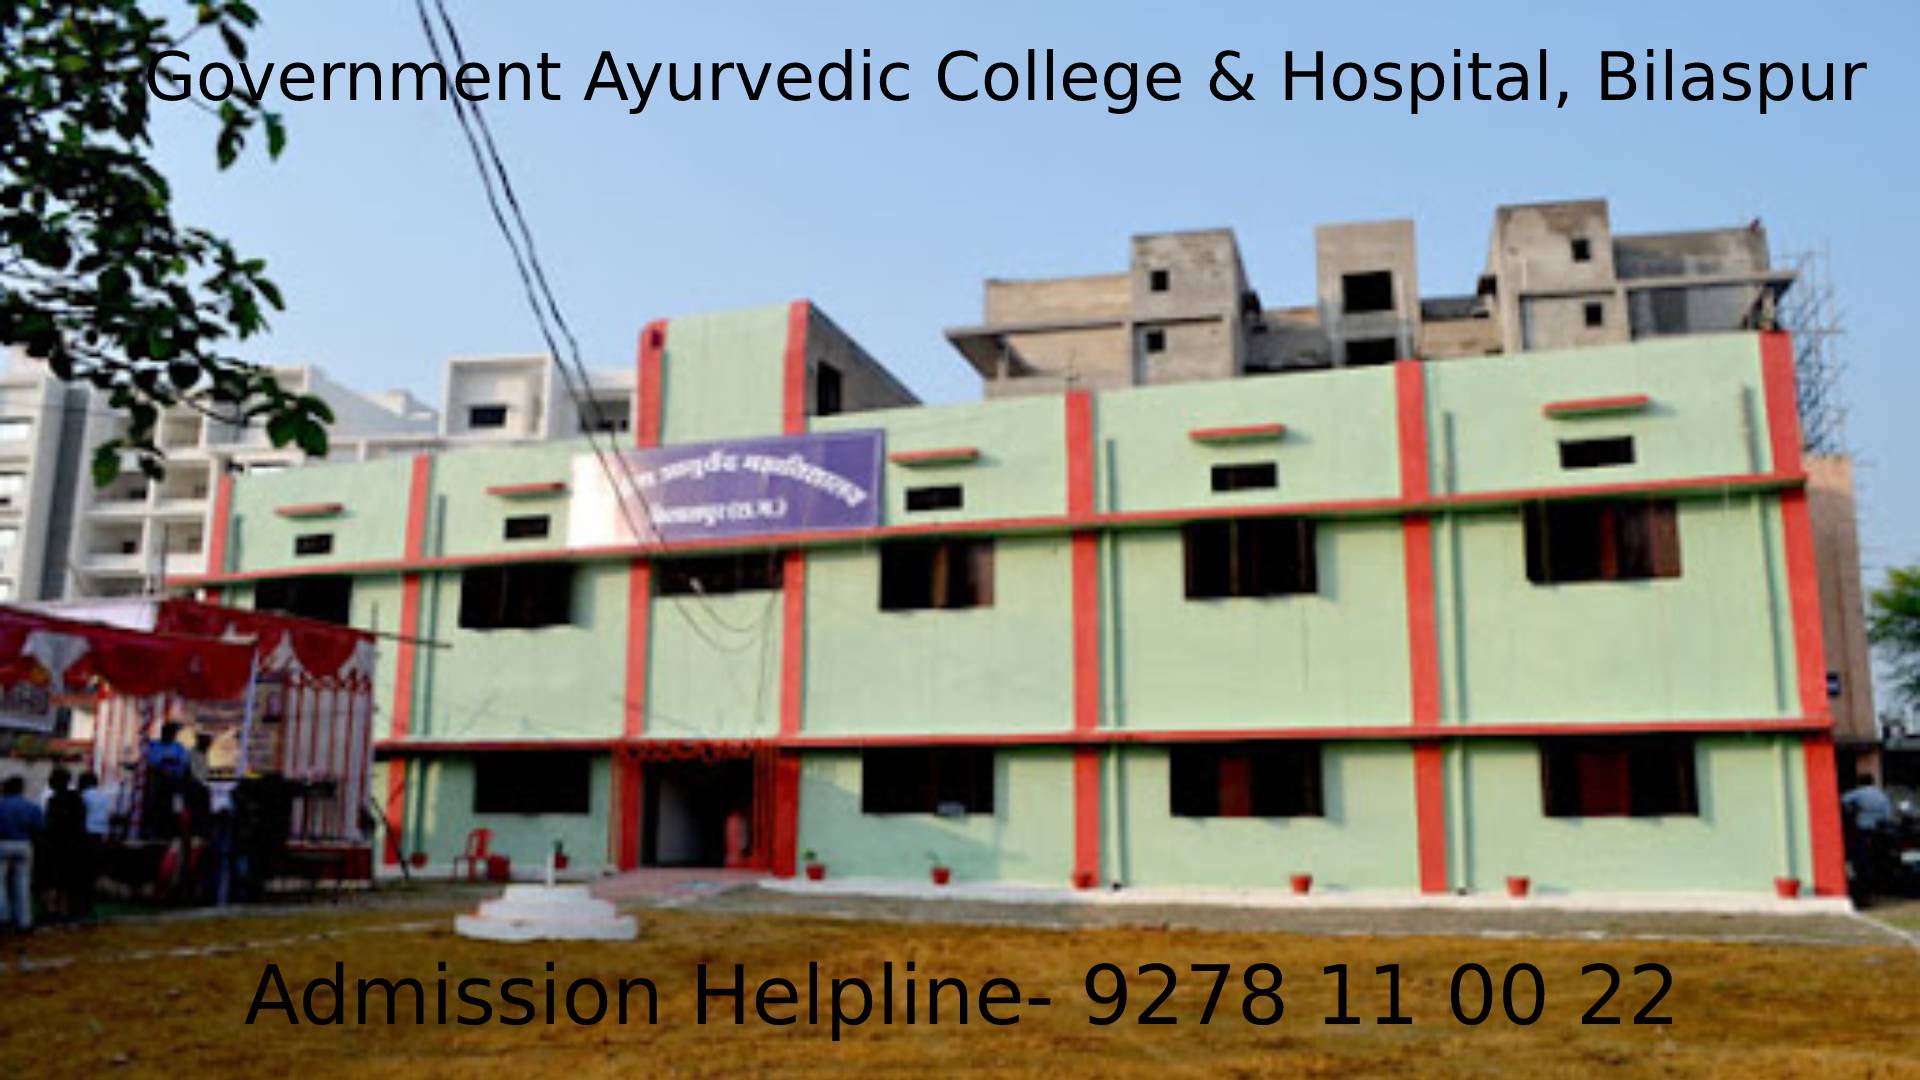 Government Ayurved College and Hospital, Bilaspur